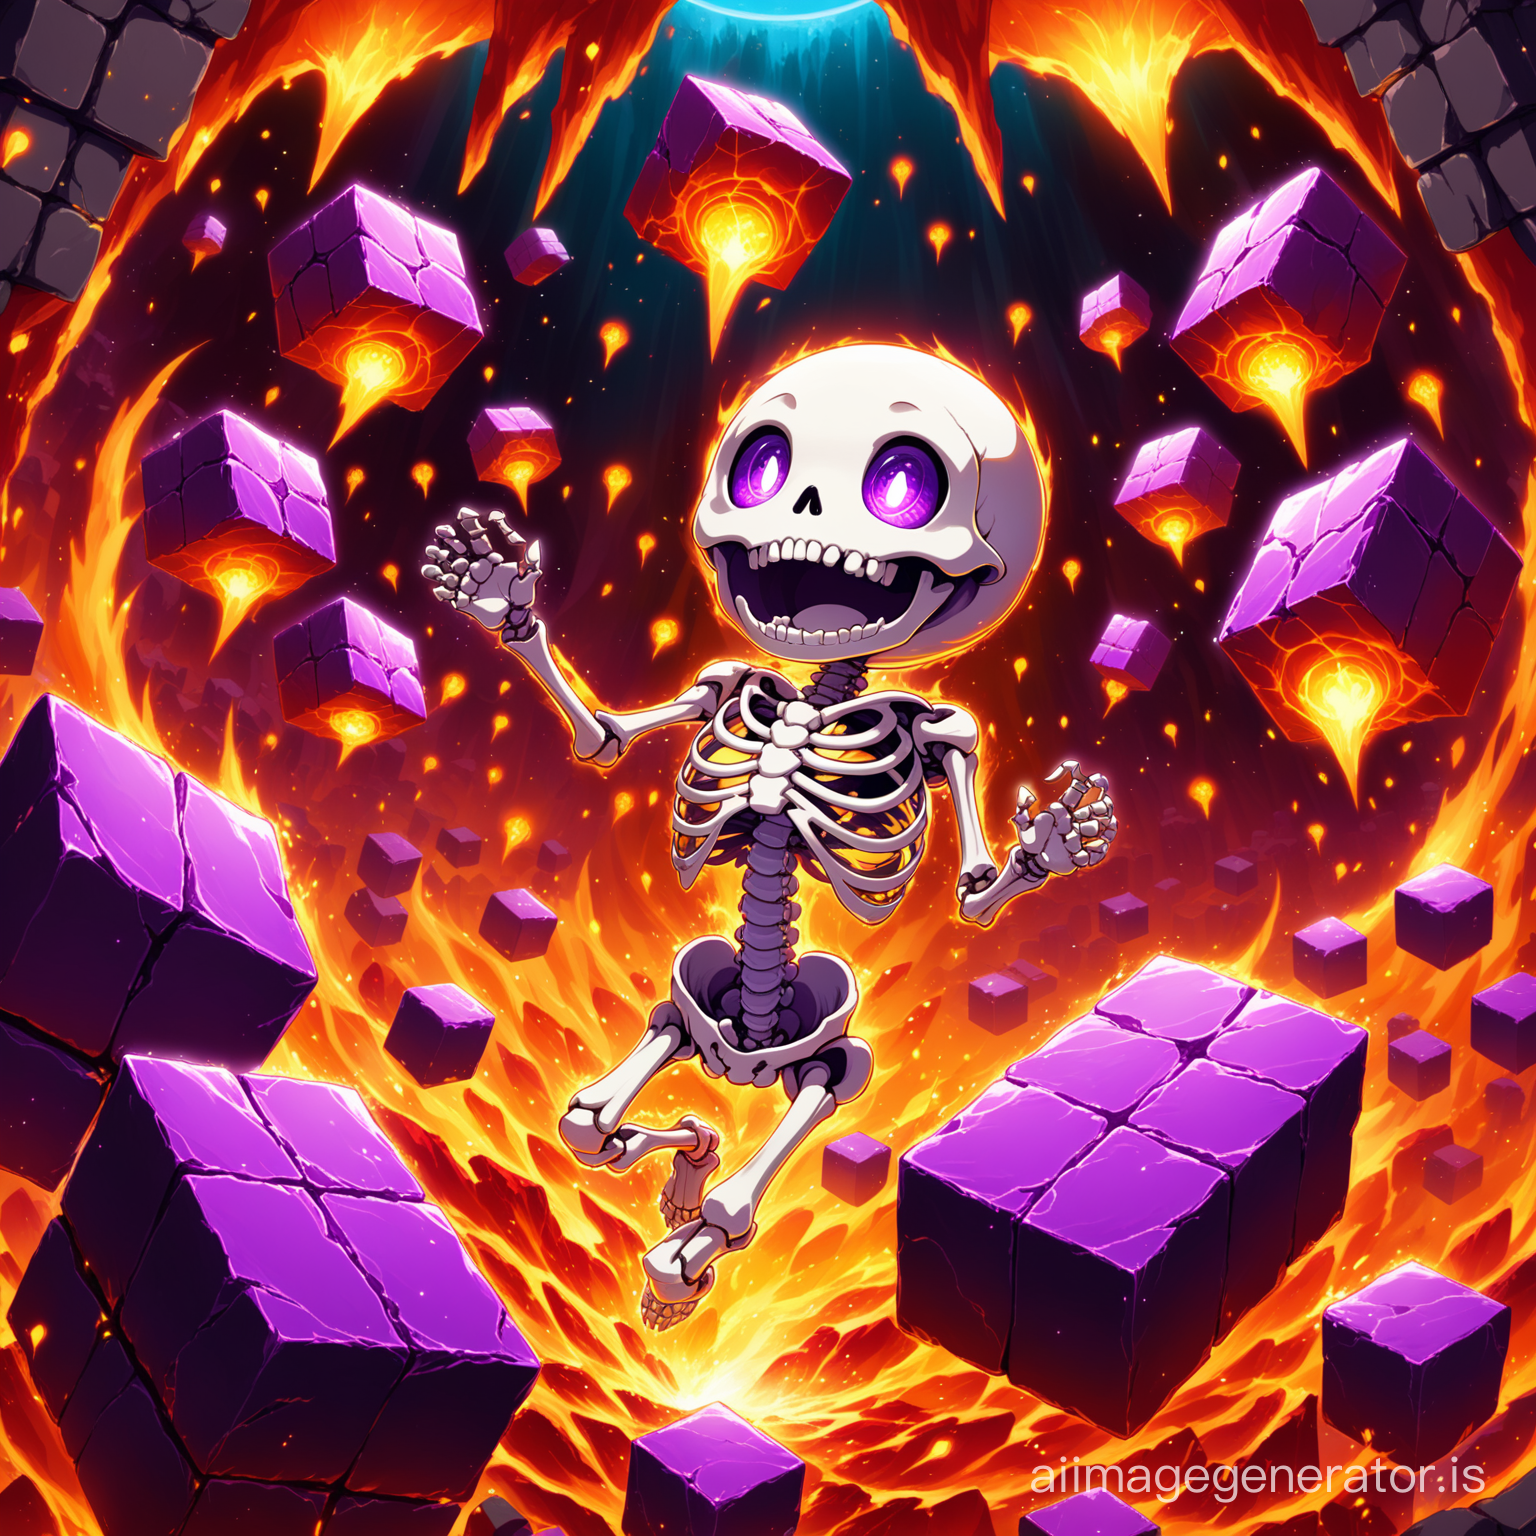 A little happy cute little skeleton with purple eye and smile in magma fire world with super detail and High Quality
big and purple blocks and floating are seen everywhere
Details are evident beautifully and with great precision